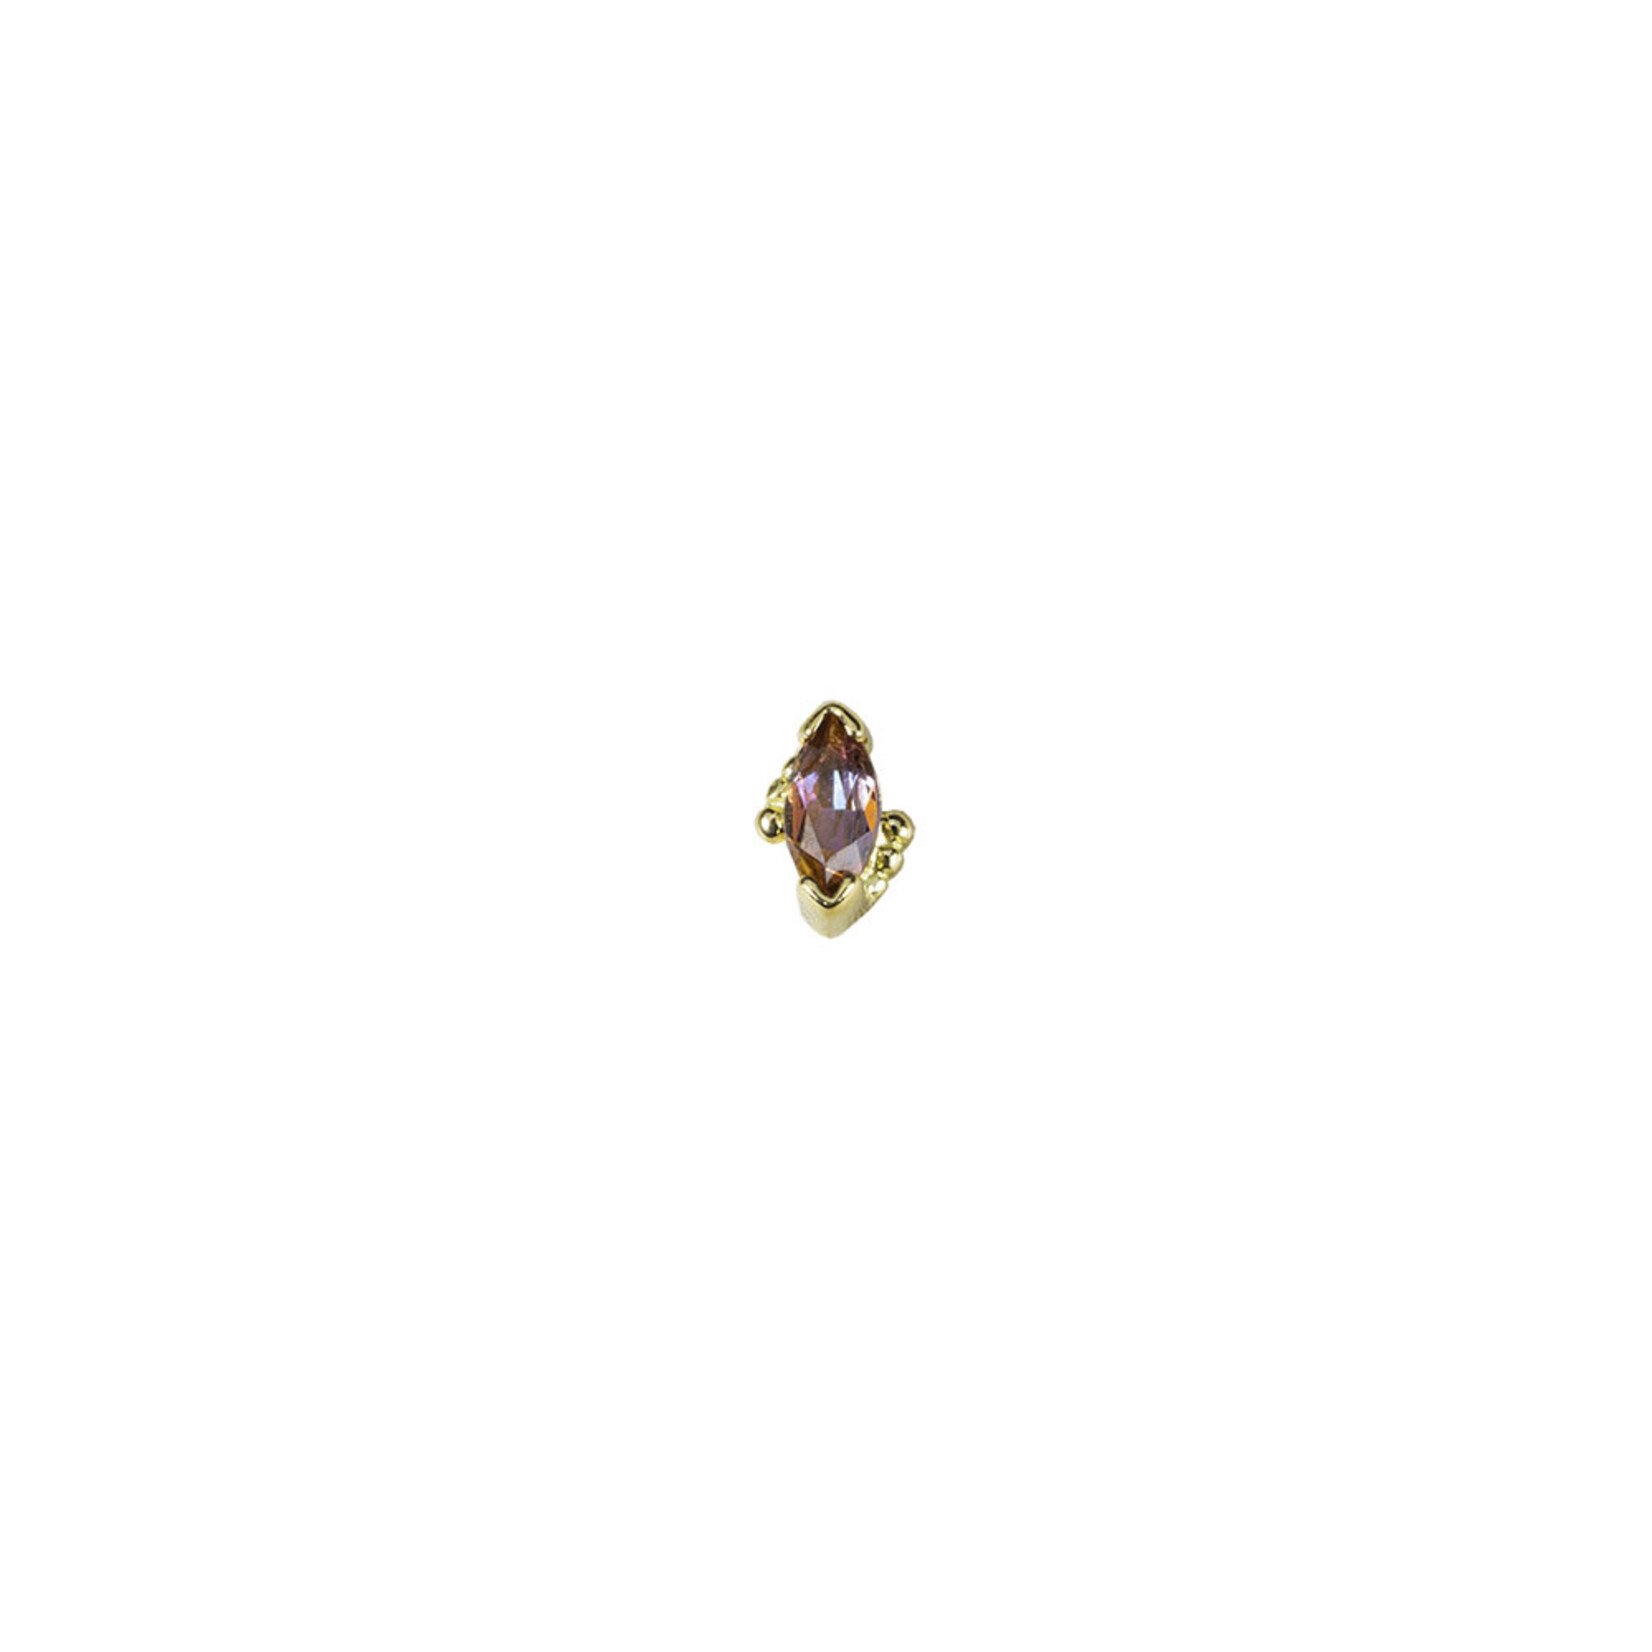 BVLA BVLA "Beaded Marquise" press-fit end with 4x2 Anastasia Topaz